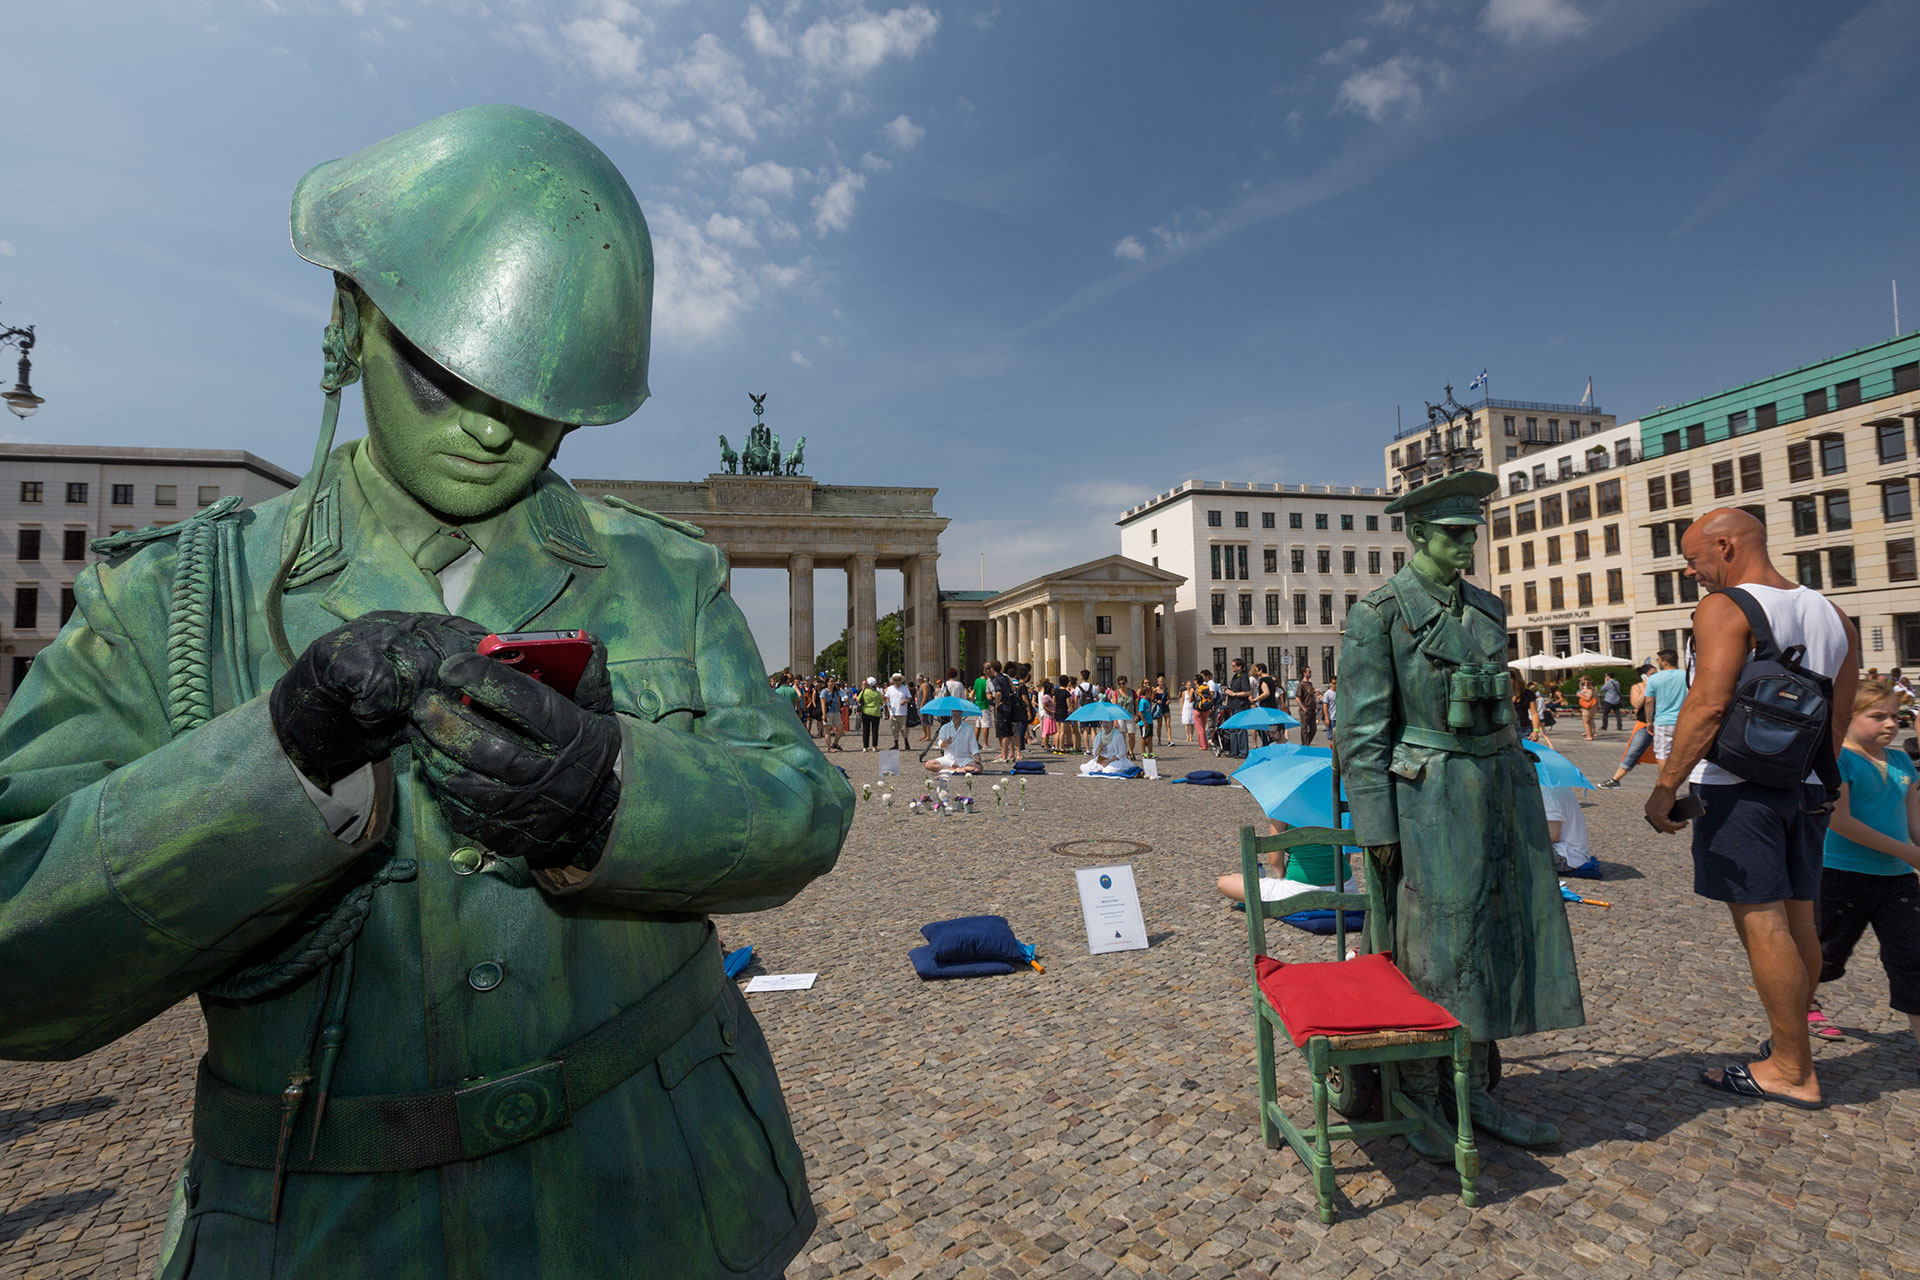  A Slovakian street artist poses as an East German border guard in front of the Brandenburg Gate.  Berlin, Germany.  